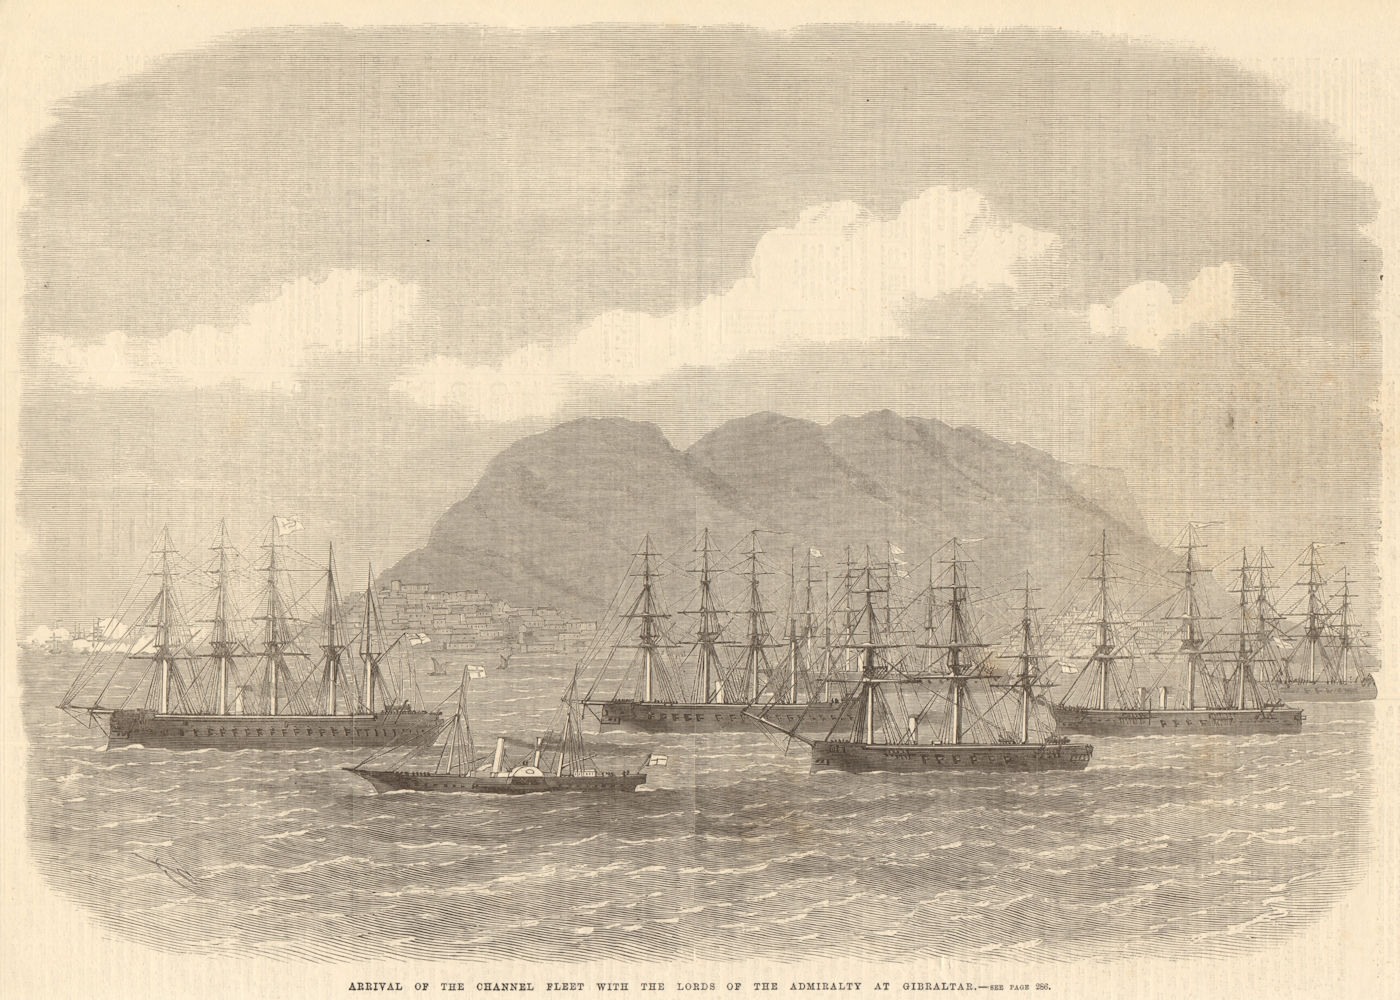 The Channel fleet & Lords of the Admiralty arriving at Gibraltar. Ships 1869